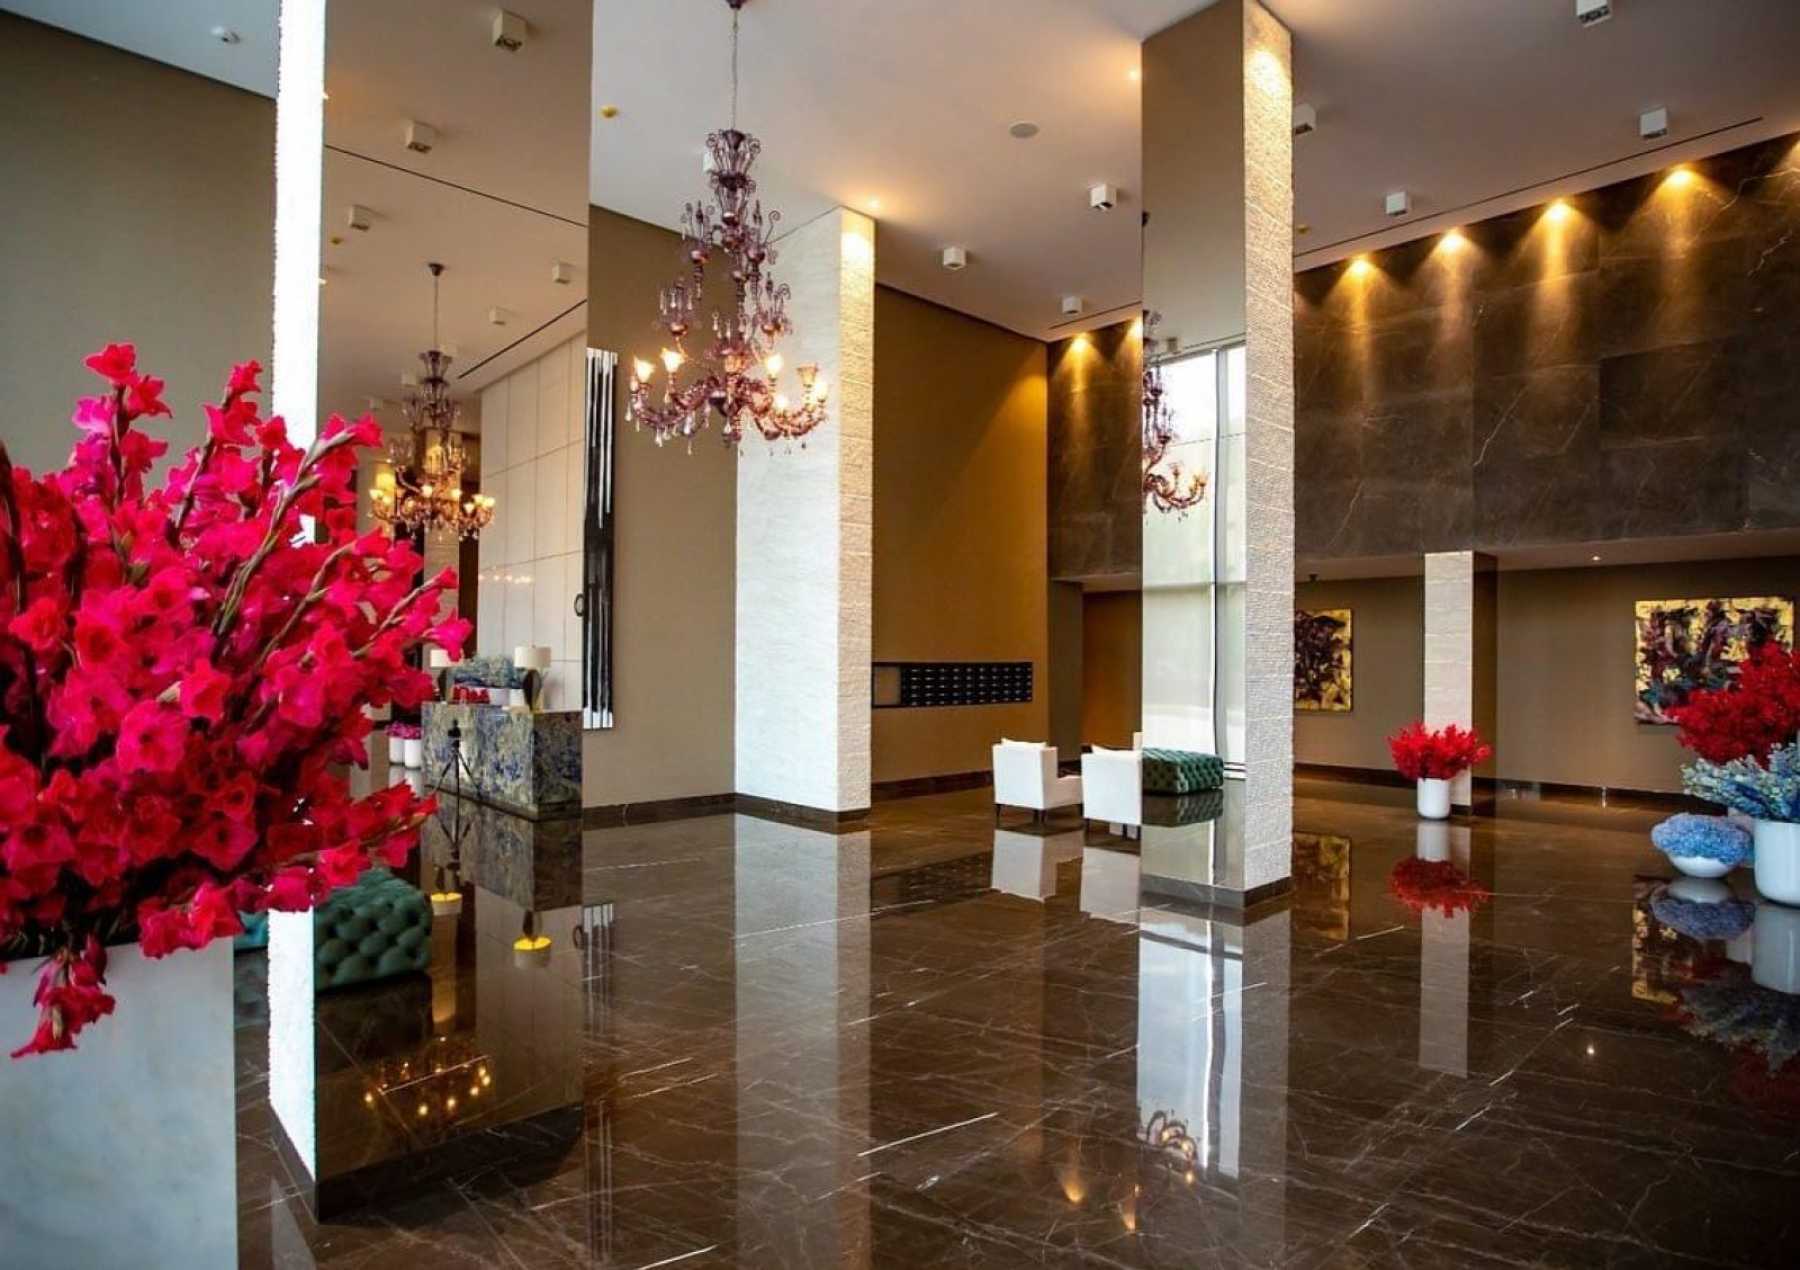 State of the art lobby and outstanding residential design at One Rahmaninov